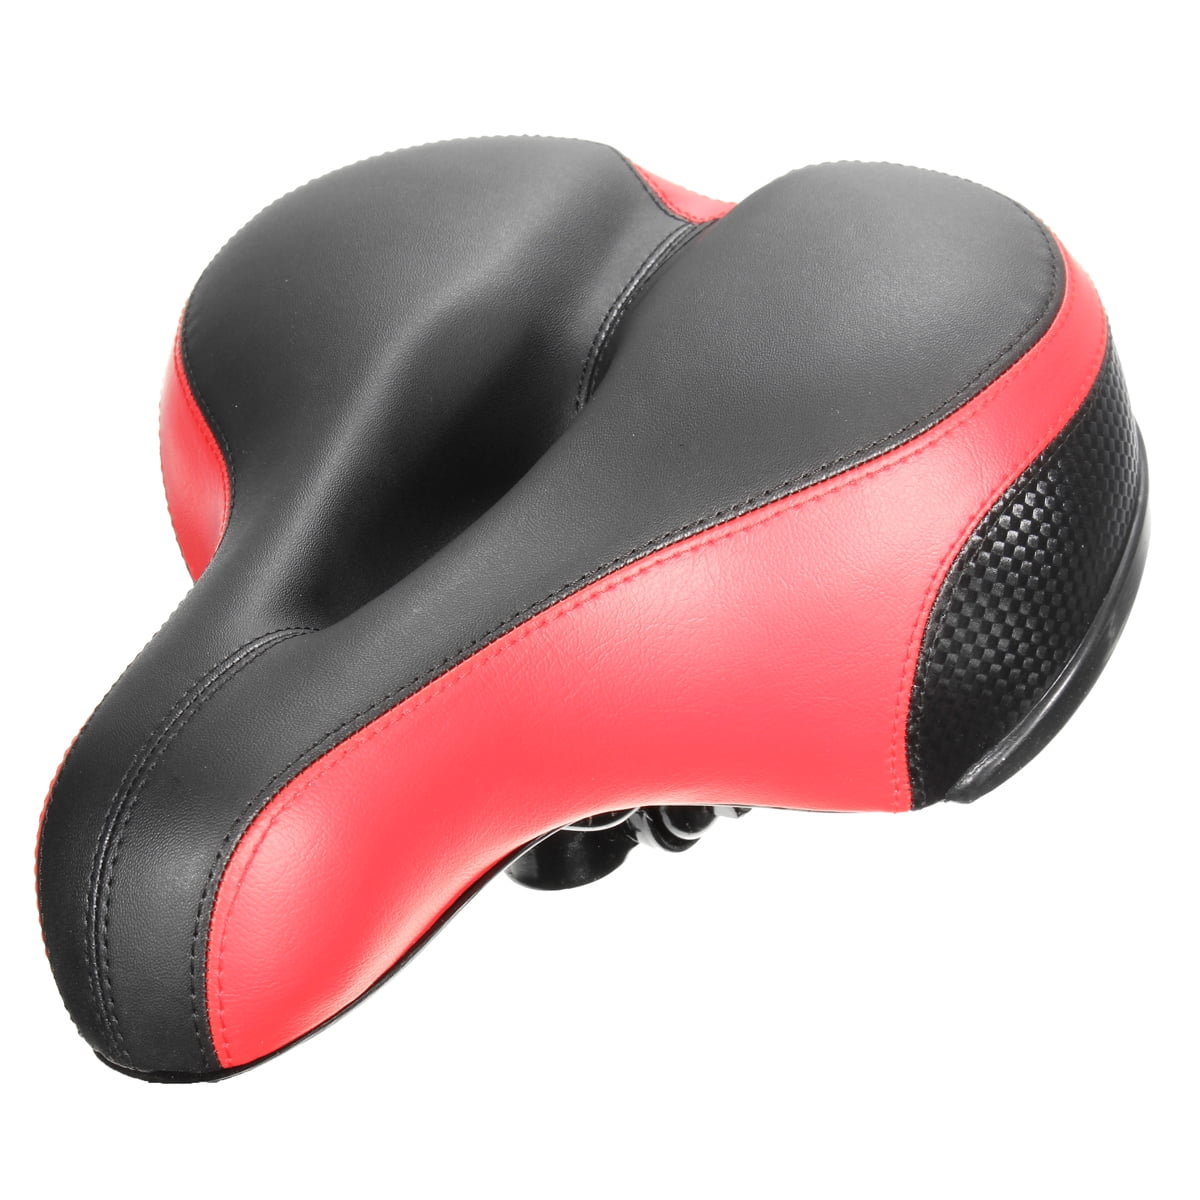 Details about   Bike Cycle MTB Saddle Road Mountain Sports Soft Cushion Pad Seat US 